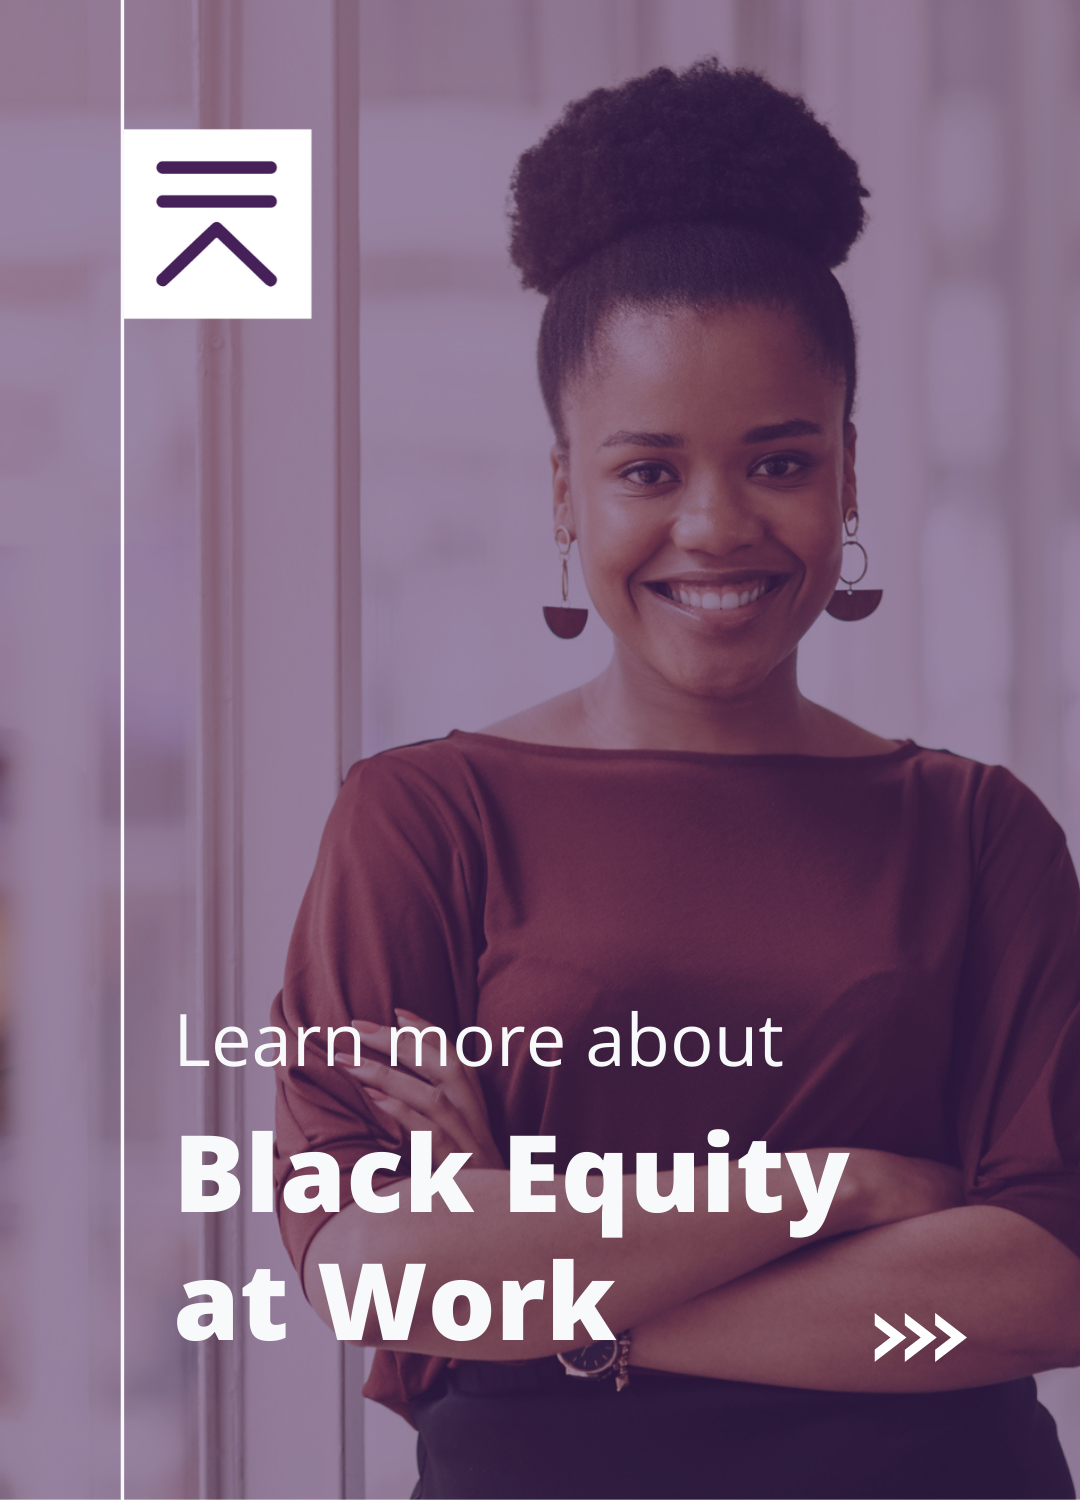 How to educate yourself and work toward racial equity this Black